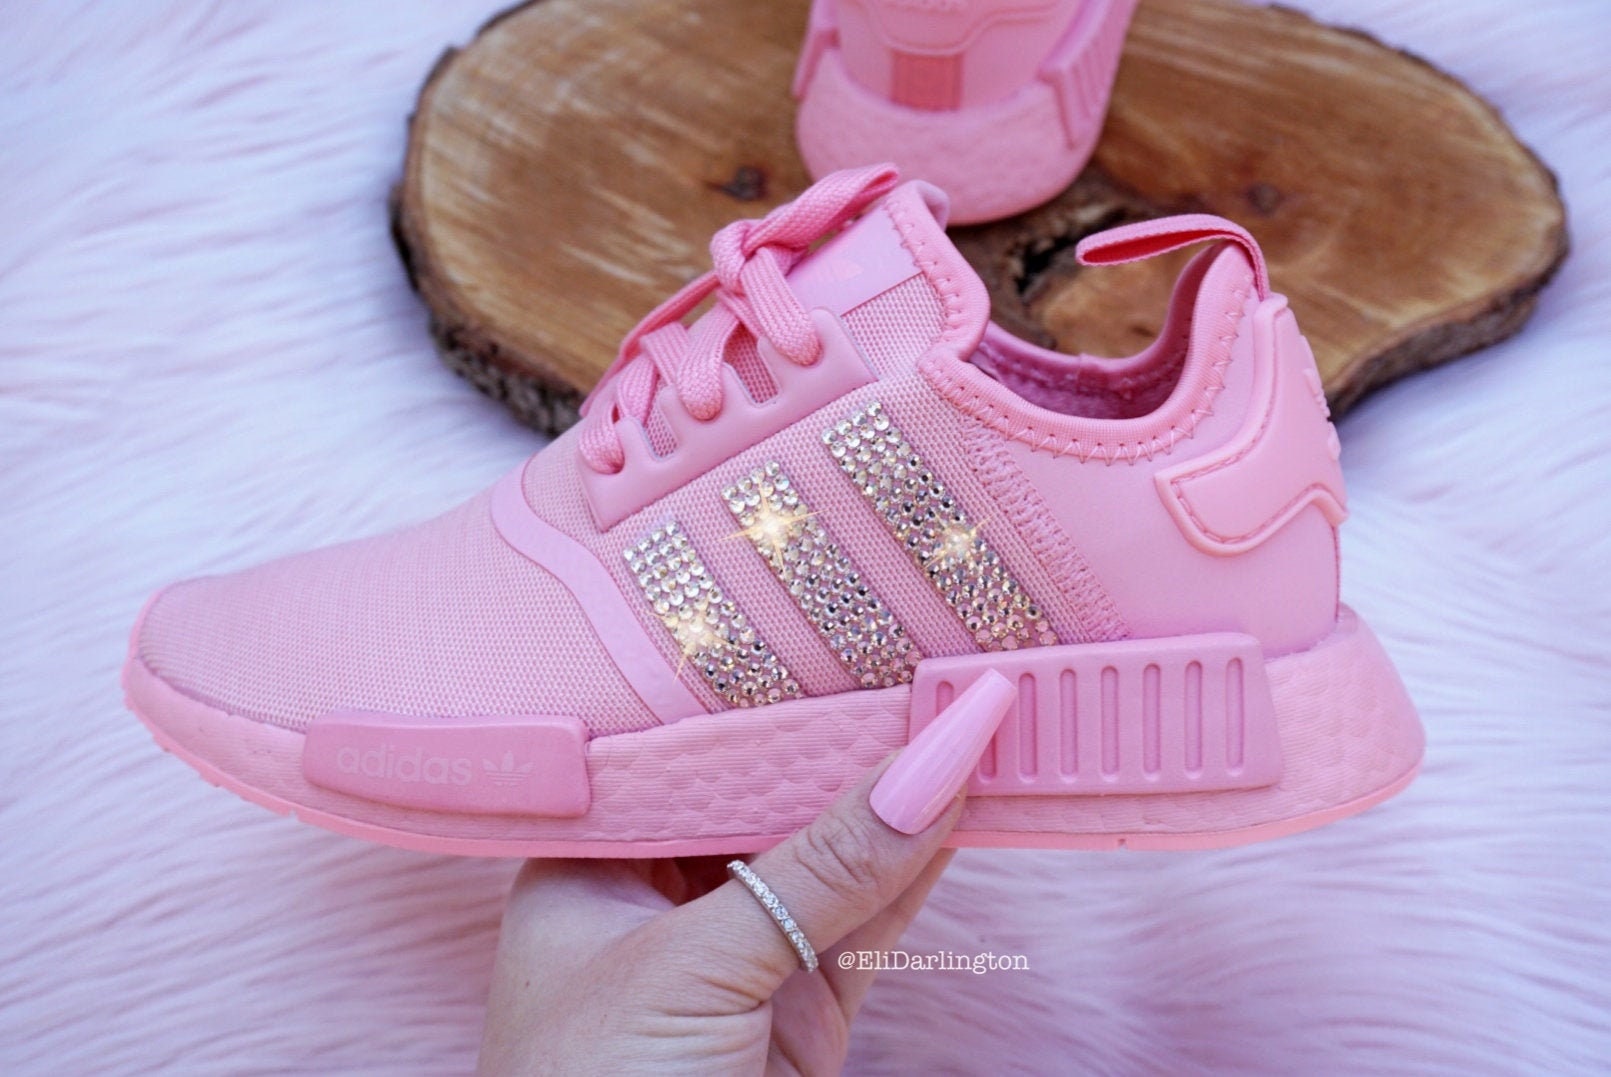 Women's Youth Pink Adidas NMD Shoes With Rose Gold - Etsy